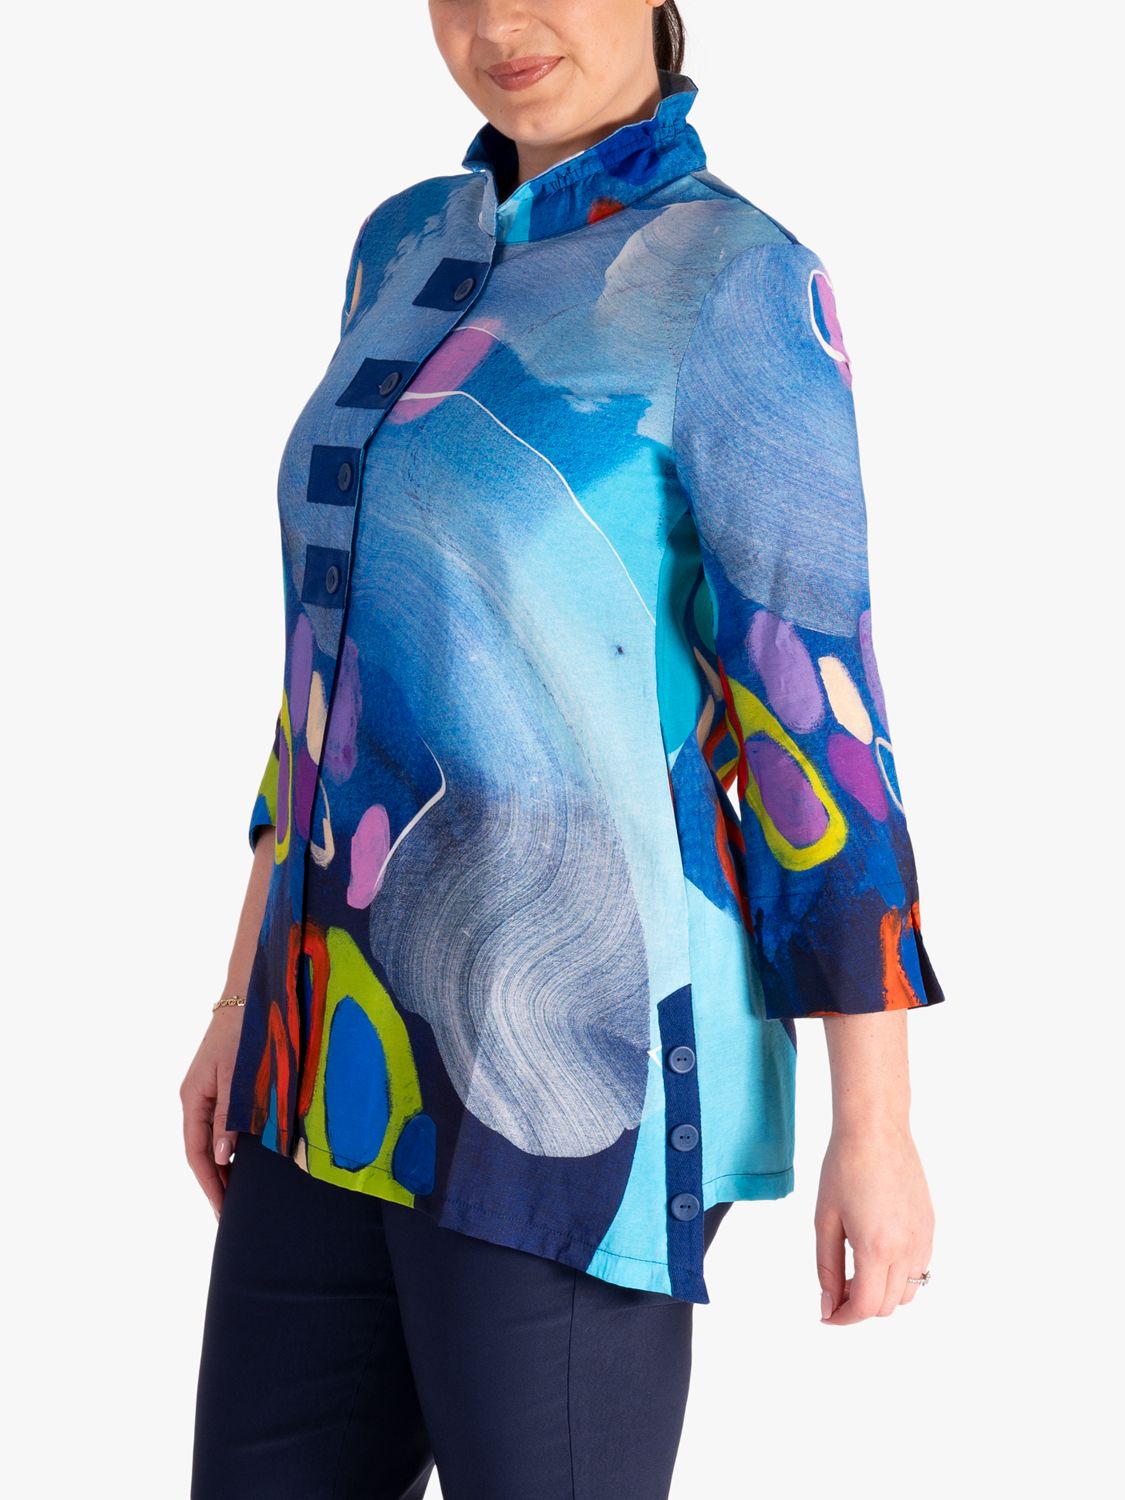 Buy chesca Circles Shirt, Blue/Multi Online at johnlewis.com